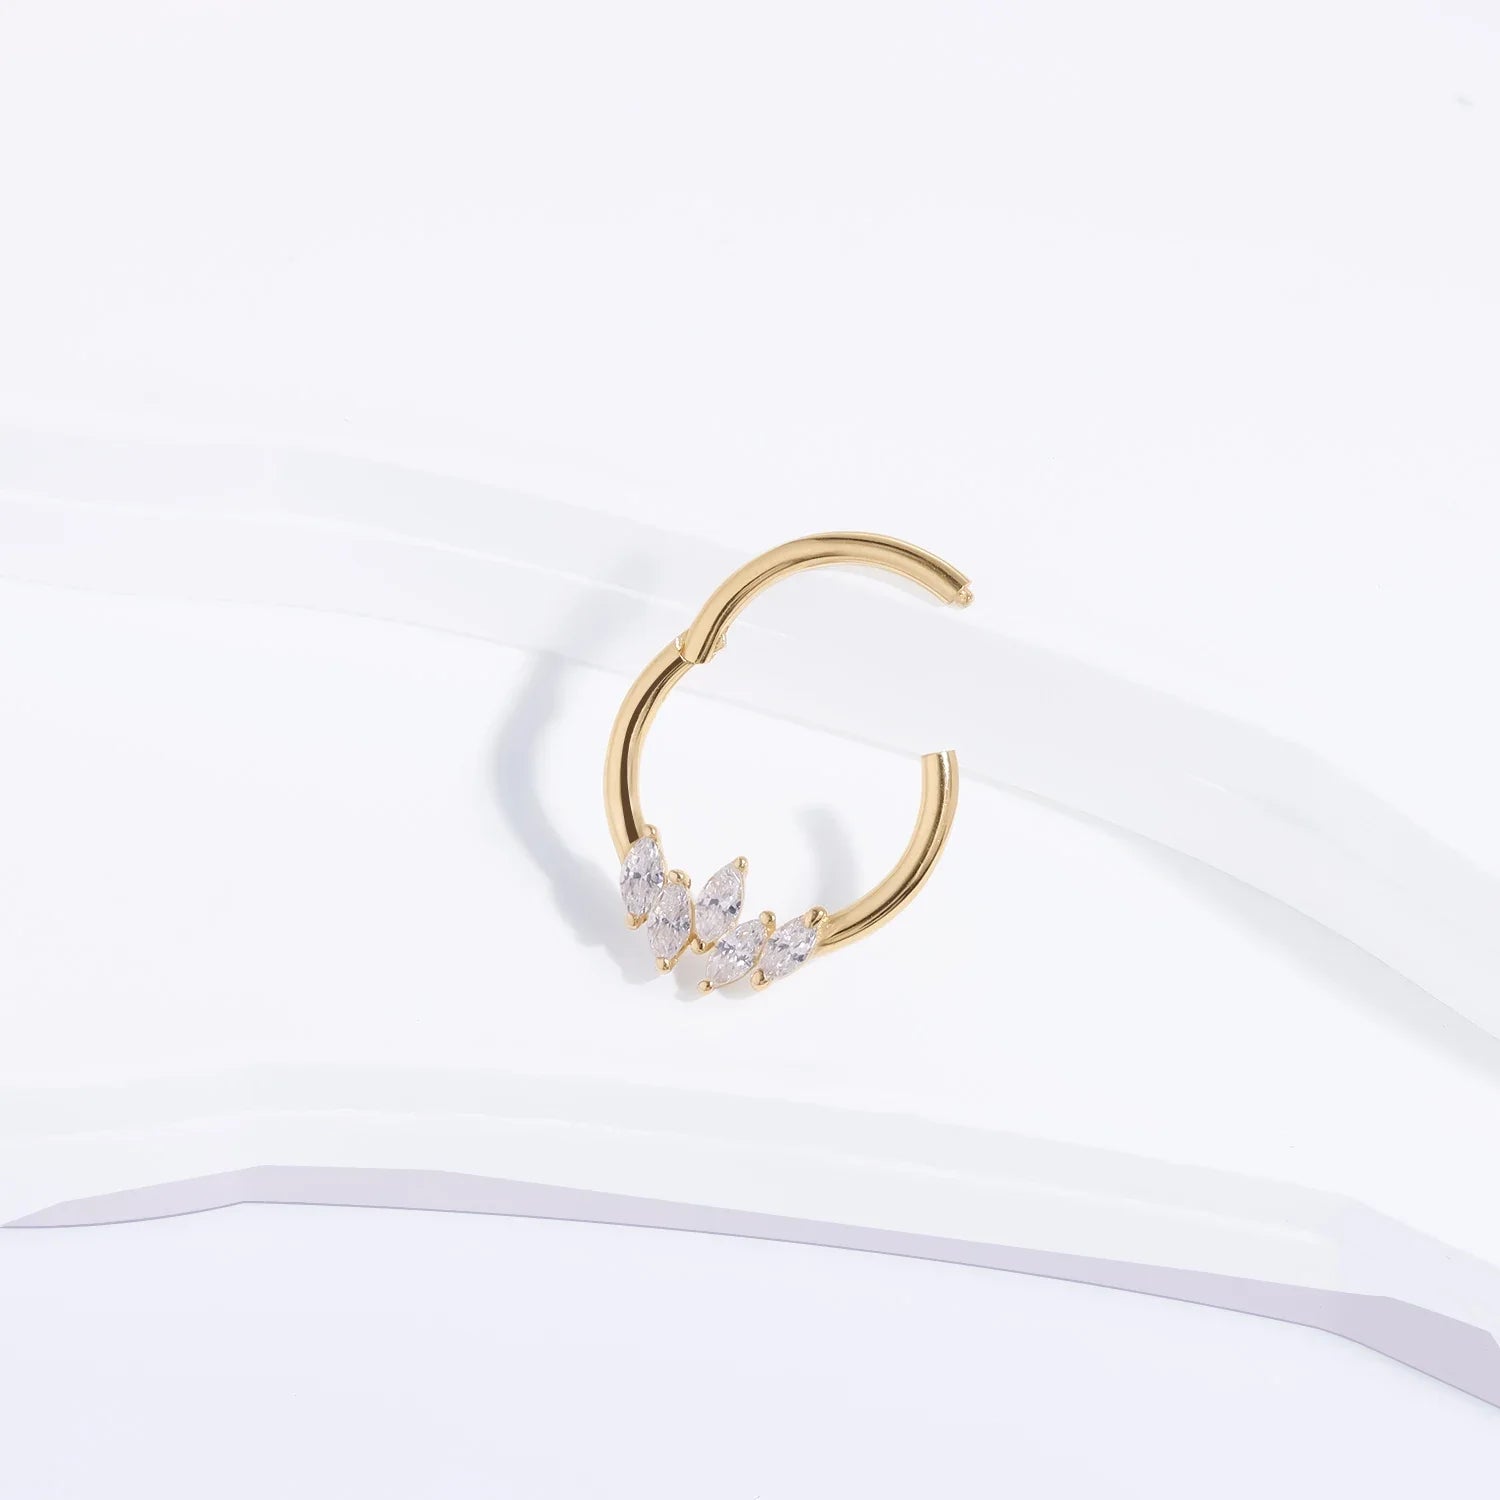 14k gold septum ring with clear CZ stones solid gold hinged segment clicker ring nose ring 16G Ashley Piercing Jewelry